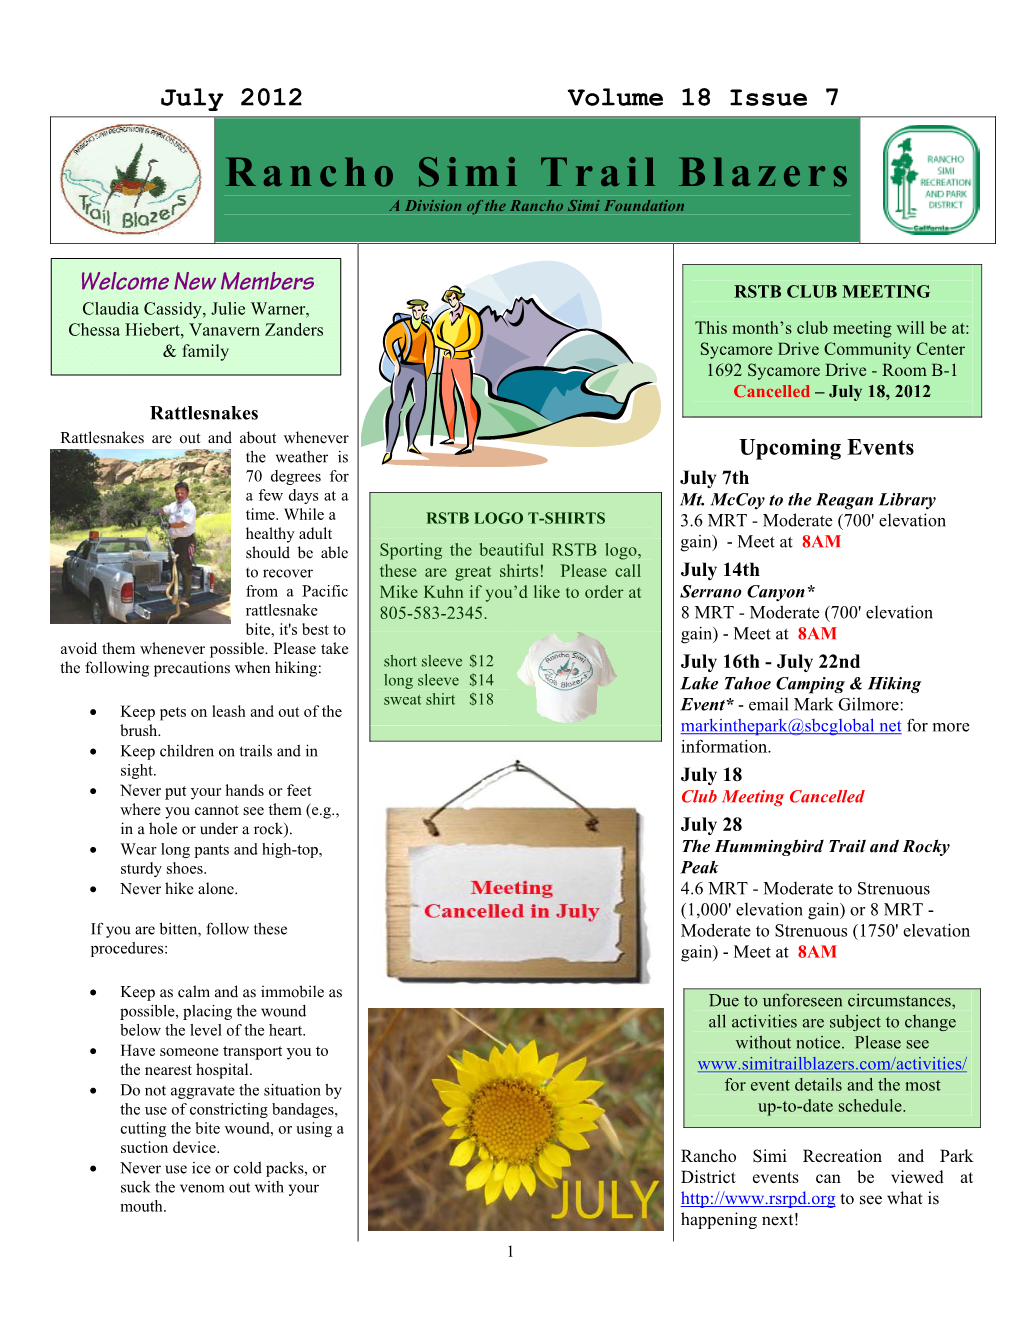 July 2012 Volume 18 Issue 7 Rancho Simi Trail Blazers a Division of the Rancho Simi Foundation